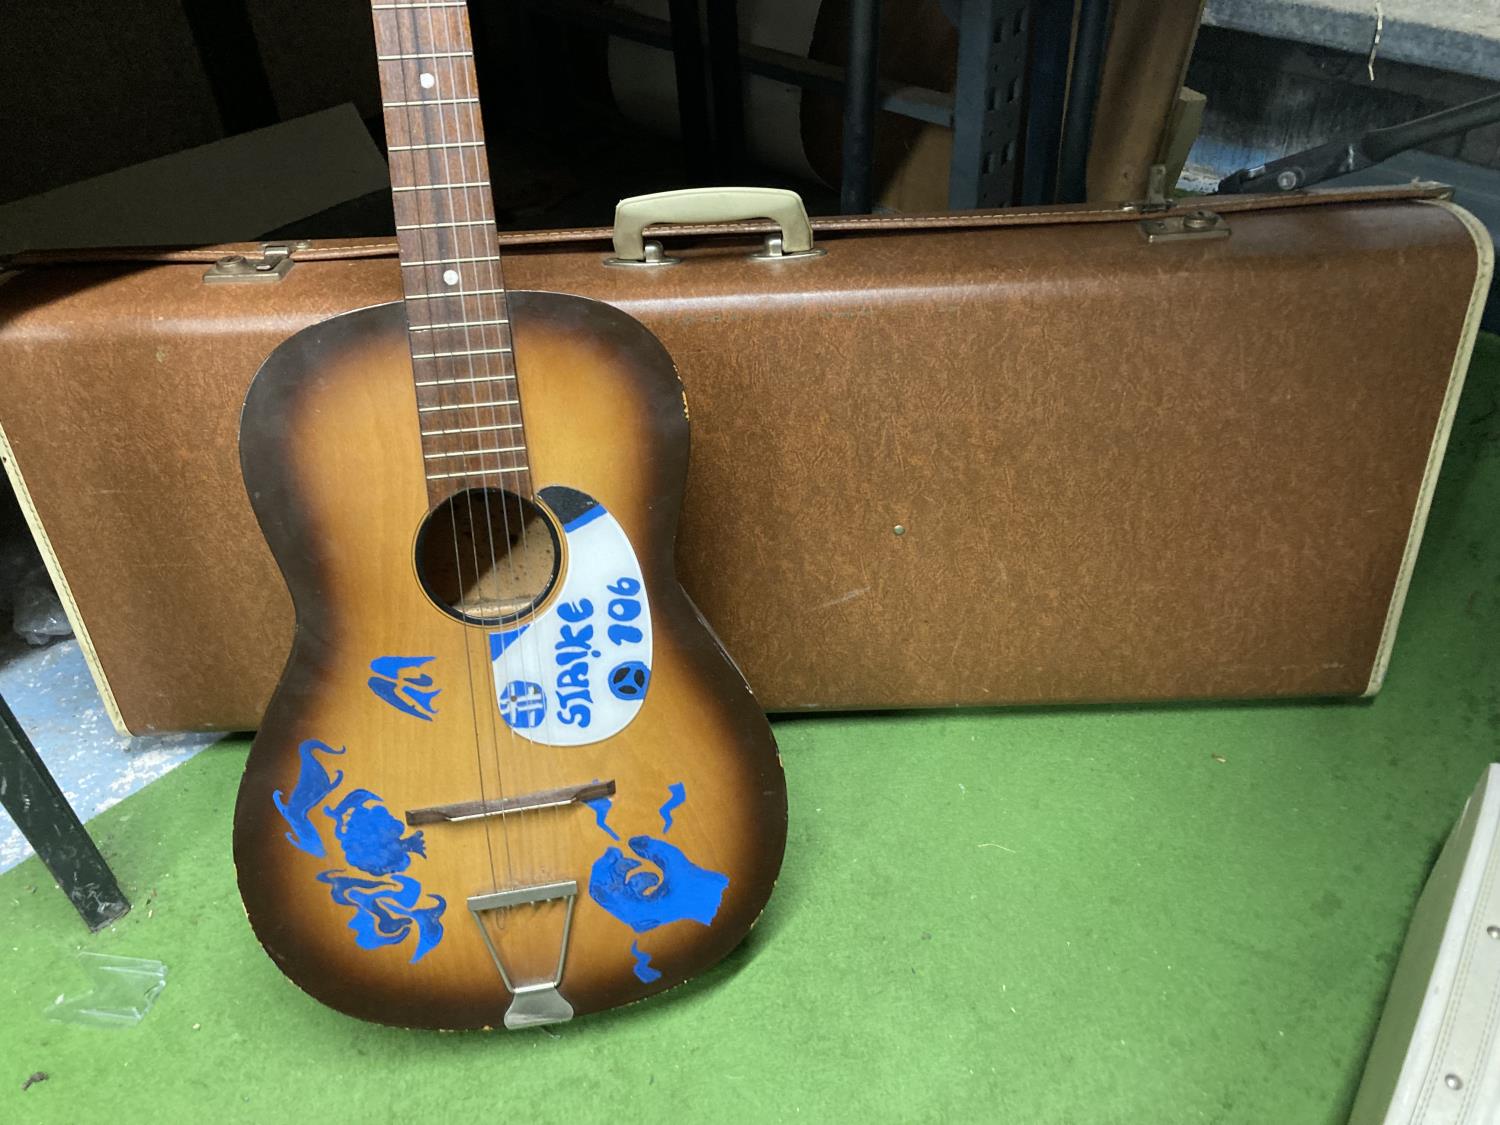 A VINTAGE ACOUSTIC GUITAR AND CASE - Image 2 of 4